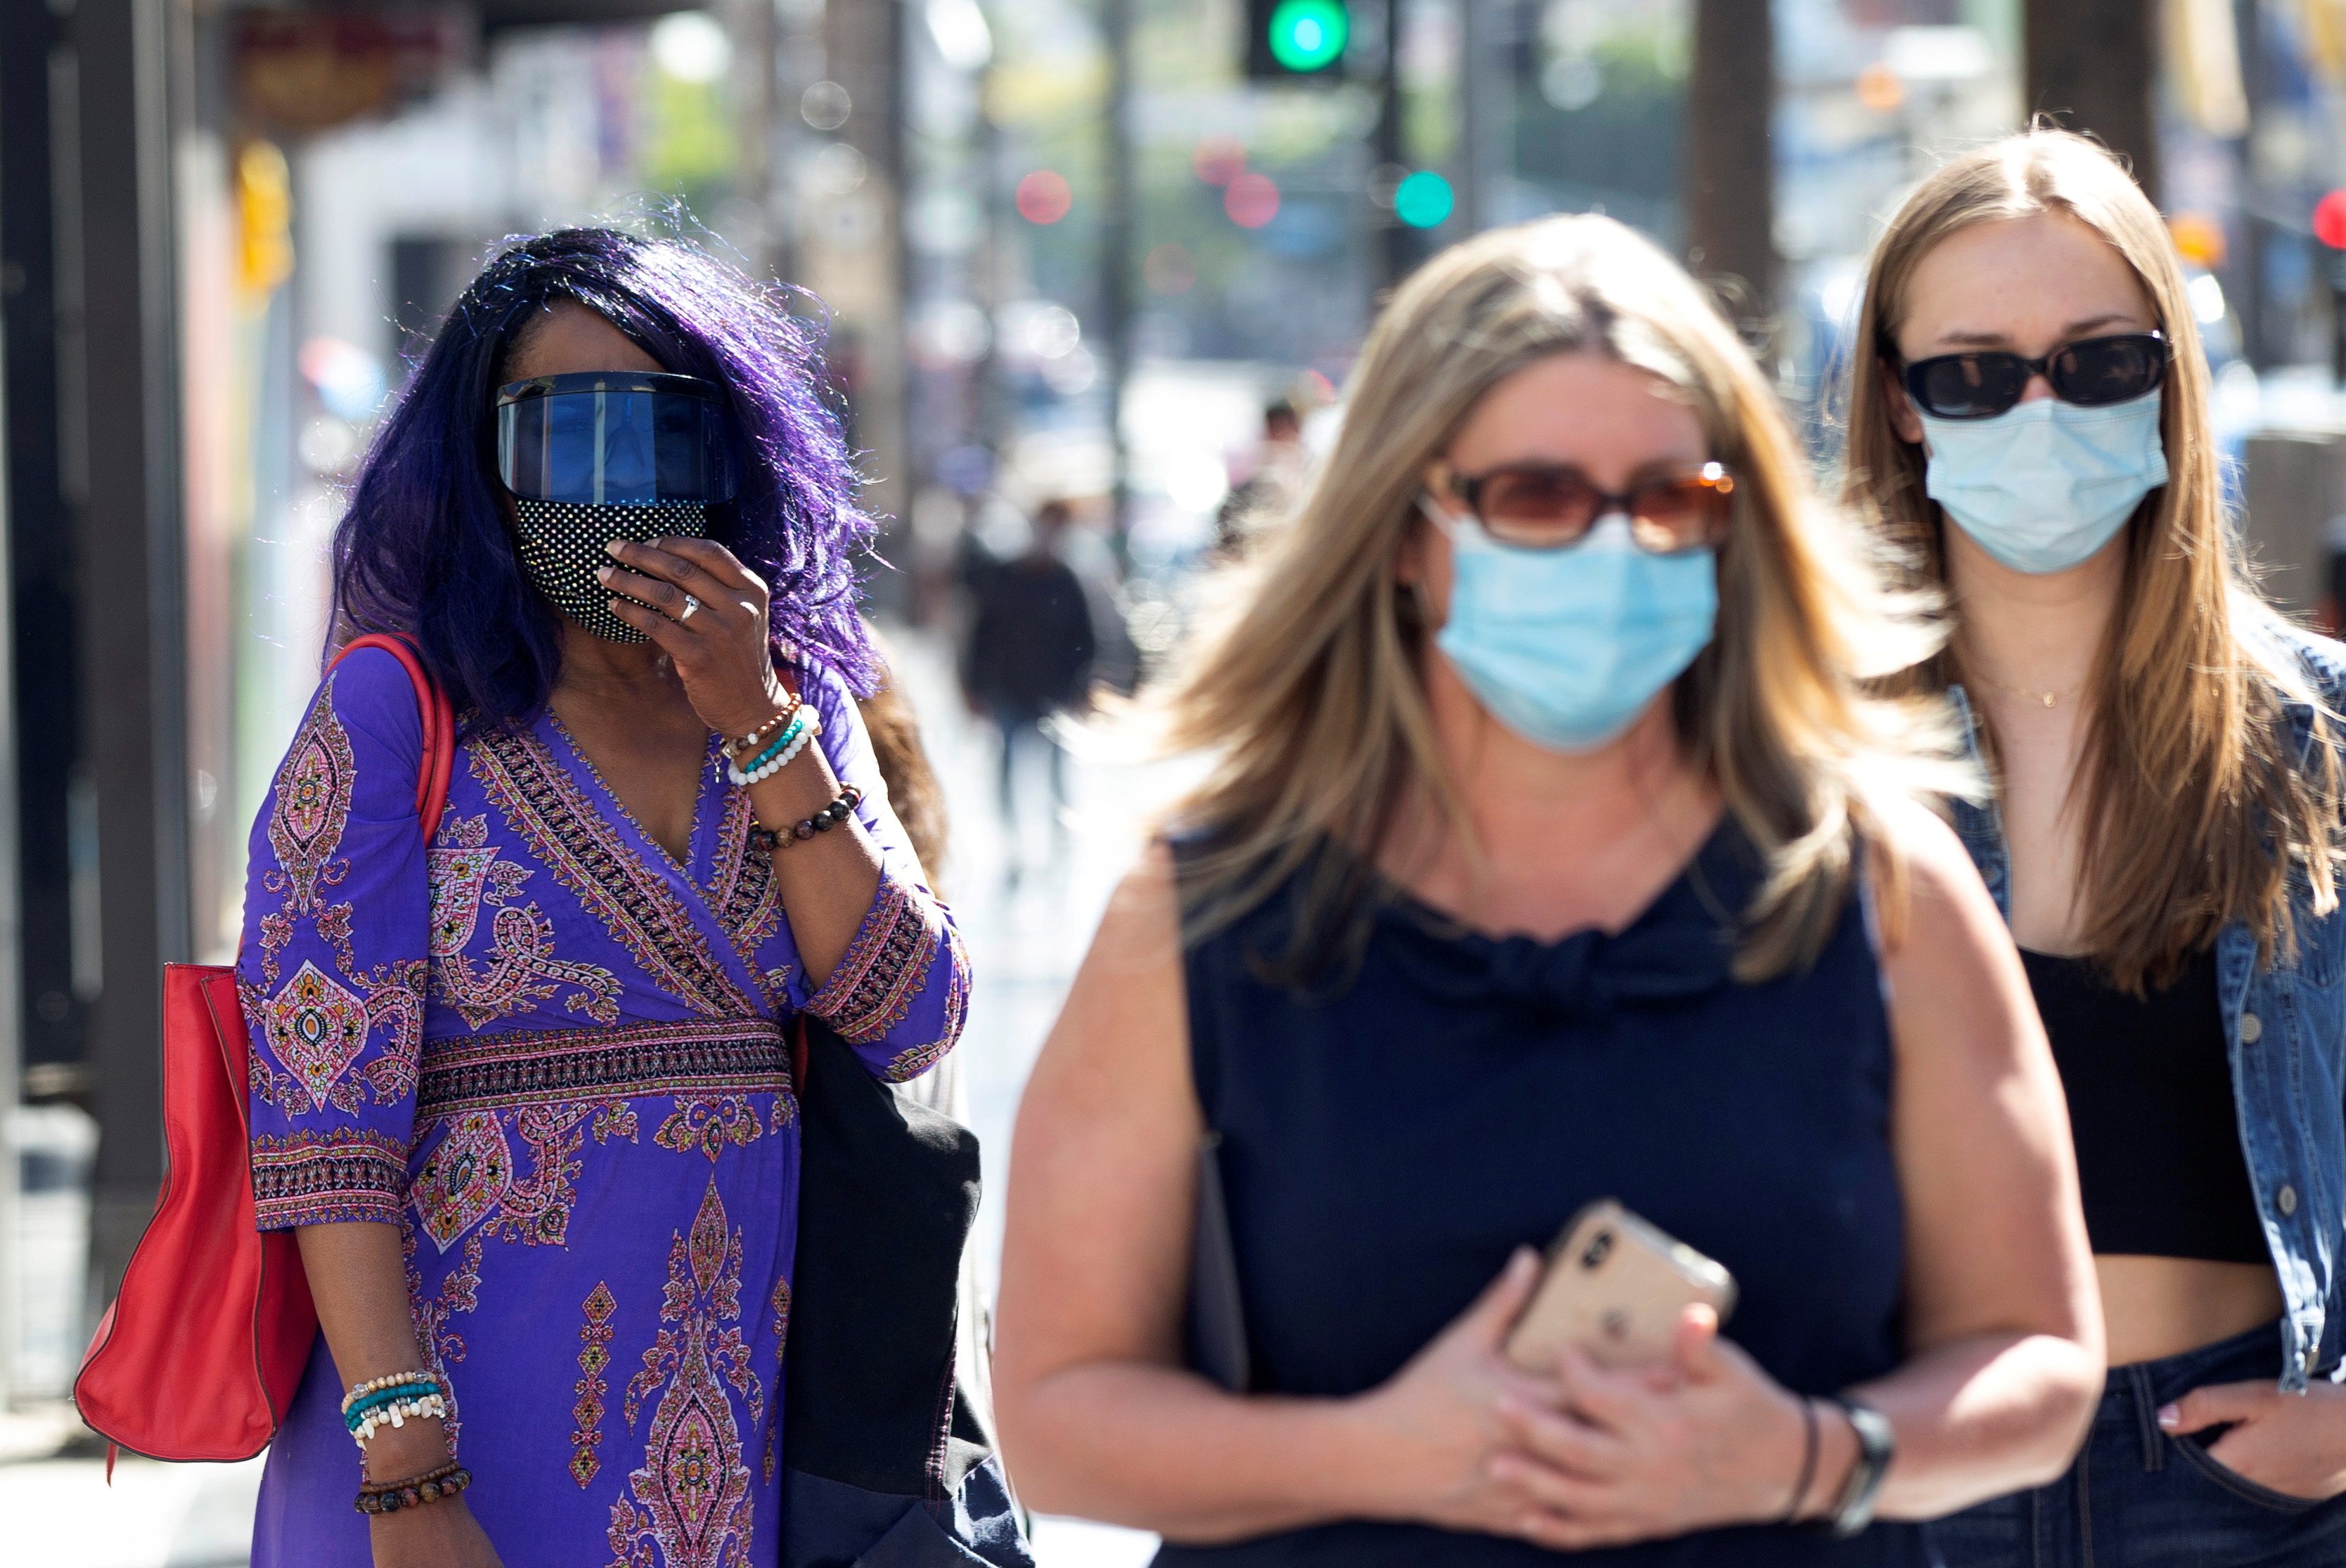 People wearing face protective masks walk on Hollywood Blvd during the outbreak of the coronavirus disease (COVID-19), in Los Angeles